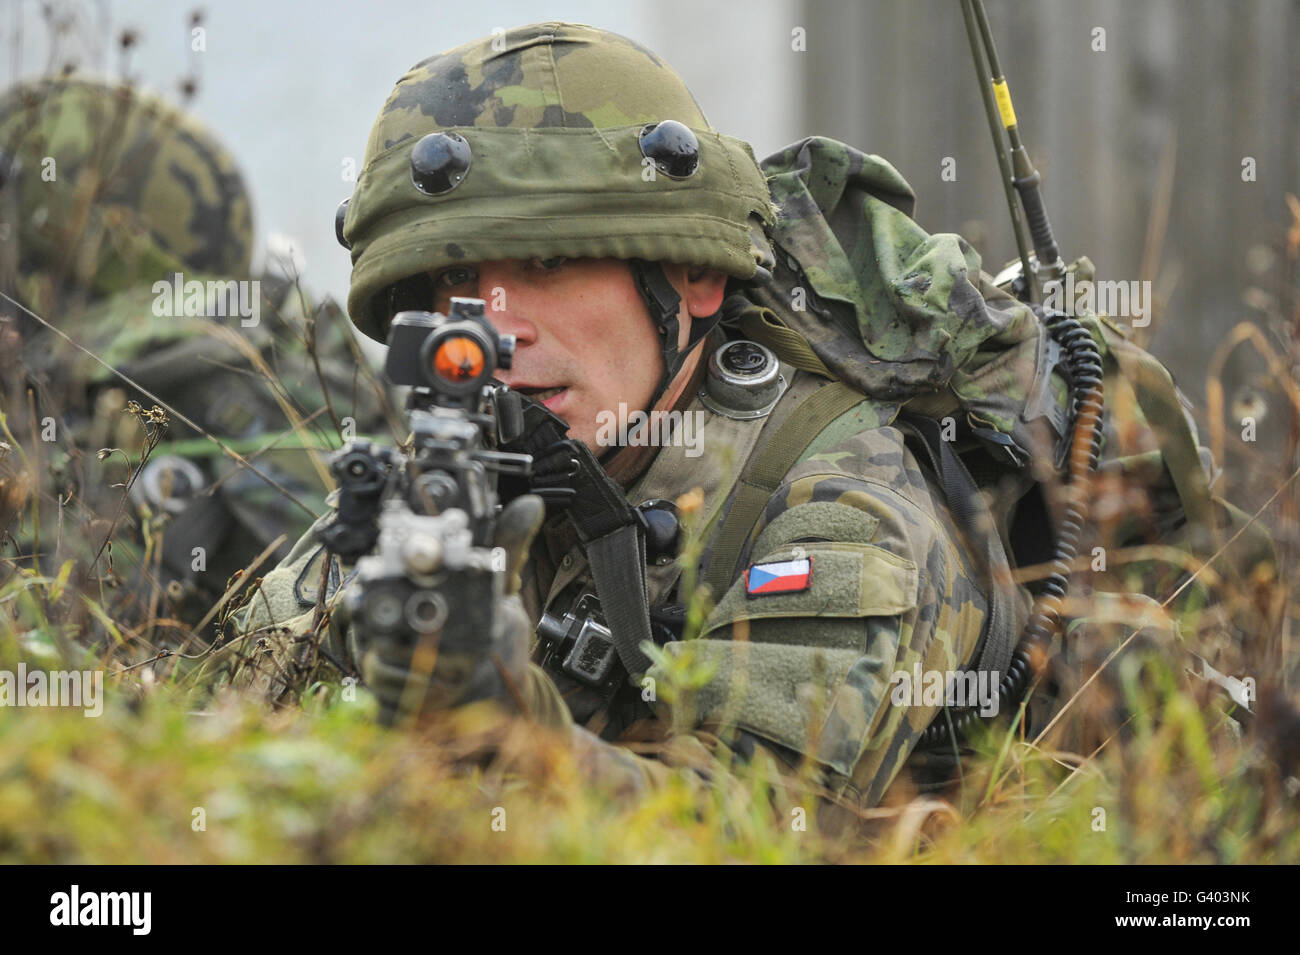 A soldier with the Czech Republic Army. Stock Photo